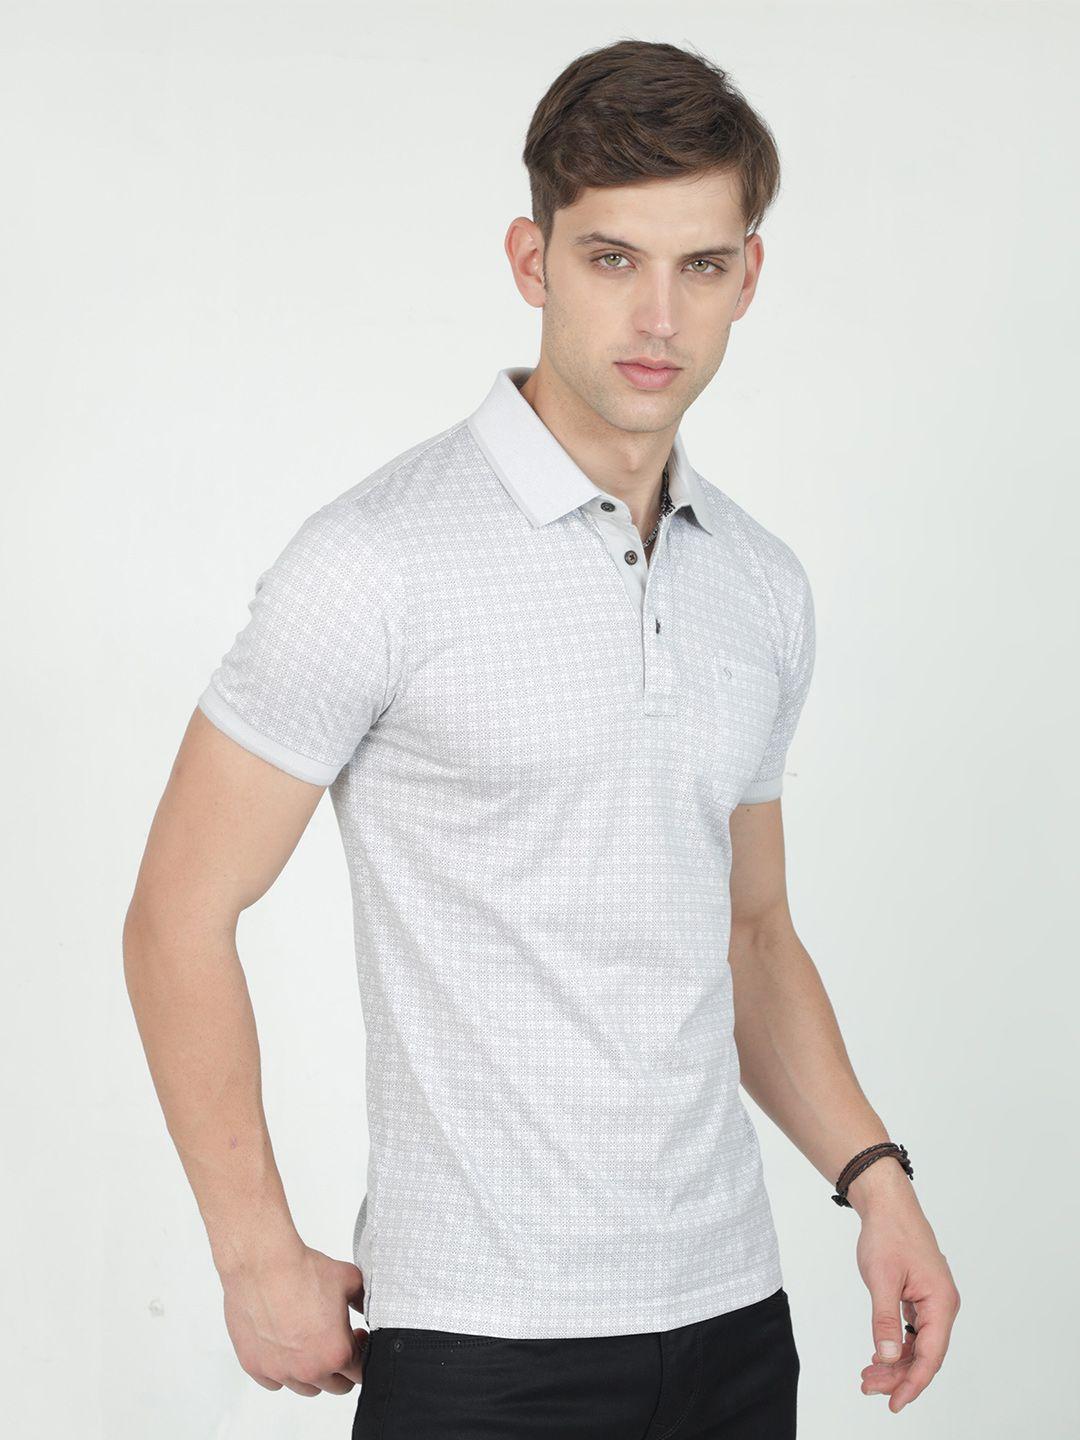 classic polo graphic printed slim fit t-shirt